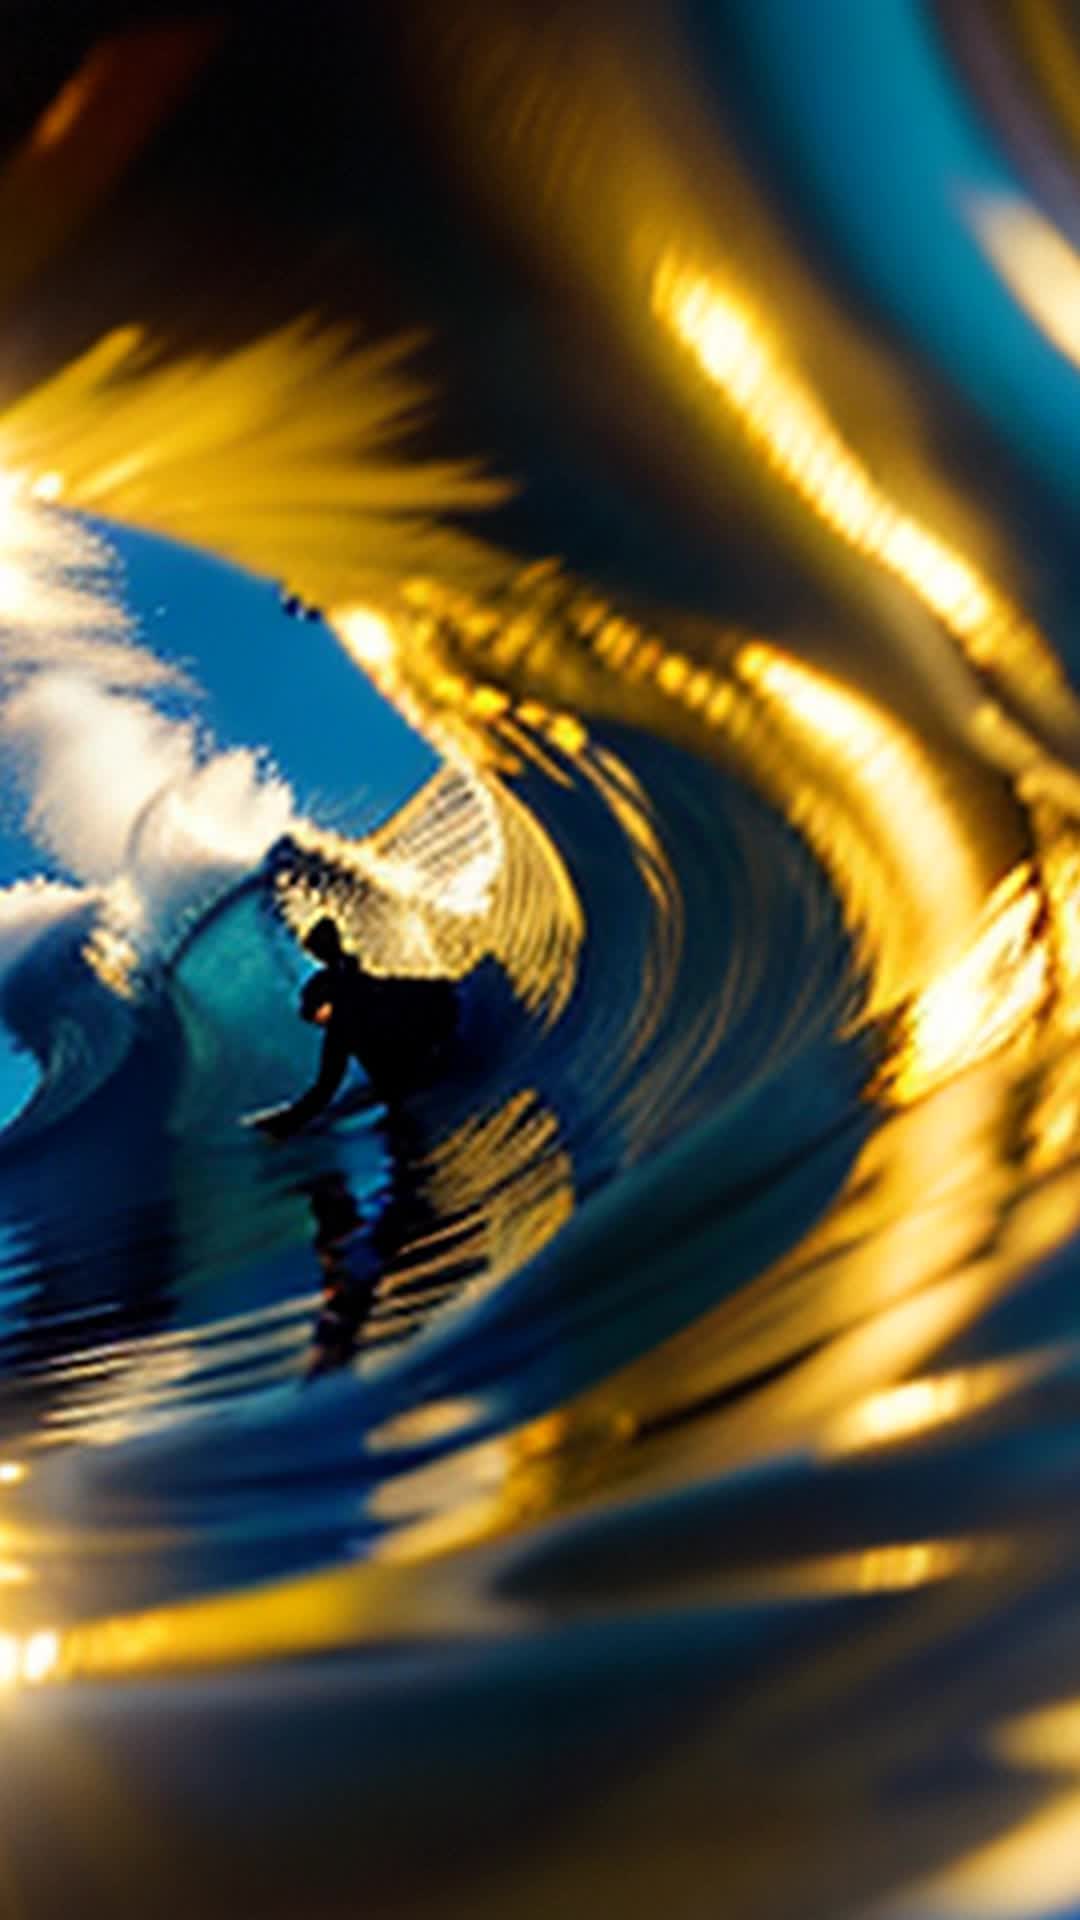 Surfing a wave of mirrors